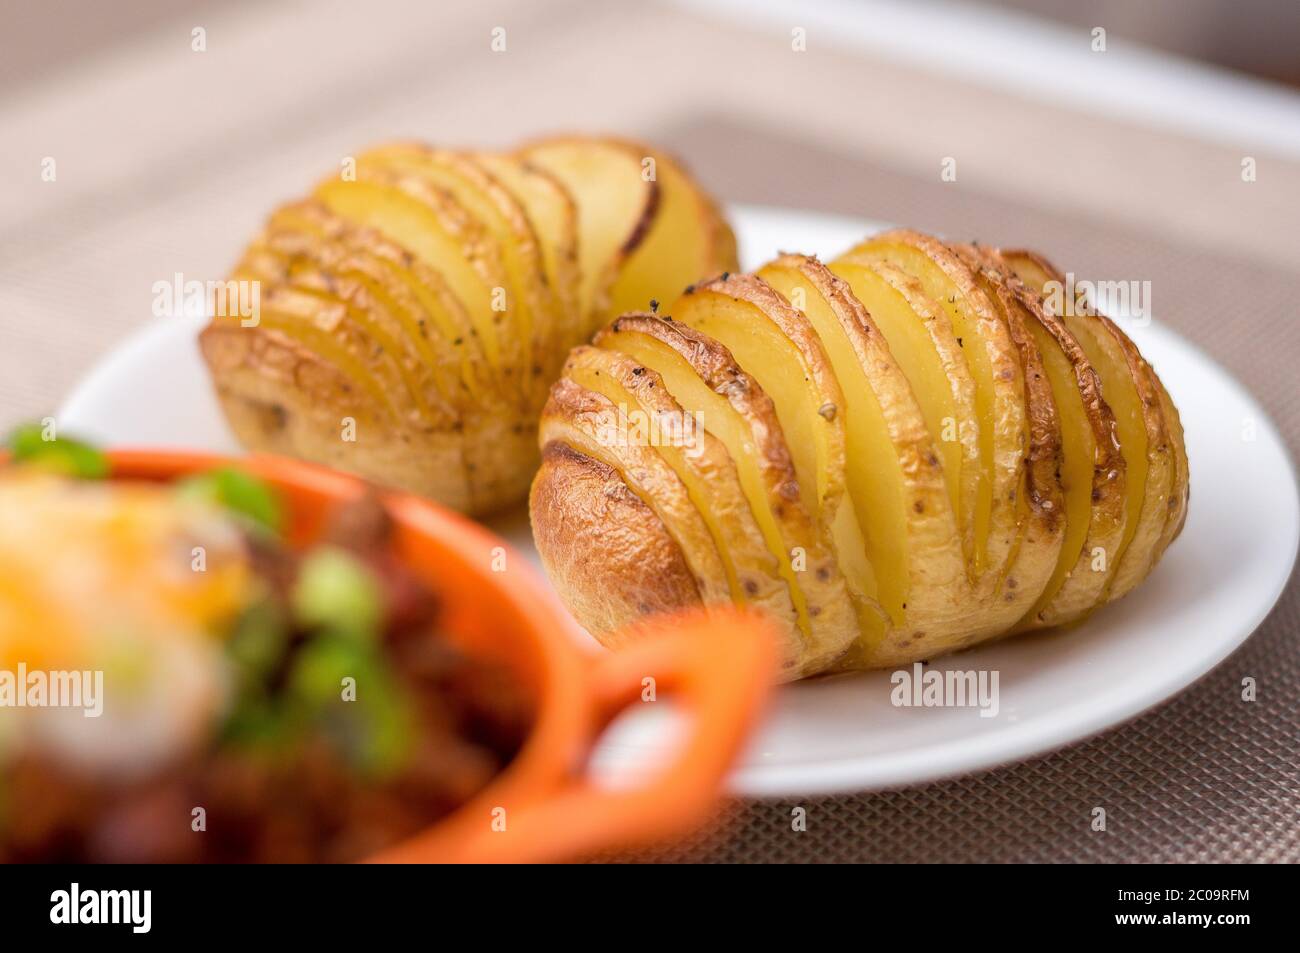 Side dish of oven baked & roasted hasselback potatoes. Hasselback potatoes are thinly sliced wedges of potatoes that are still joined at the bottom an Stock Photo